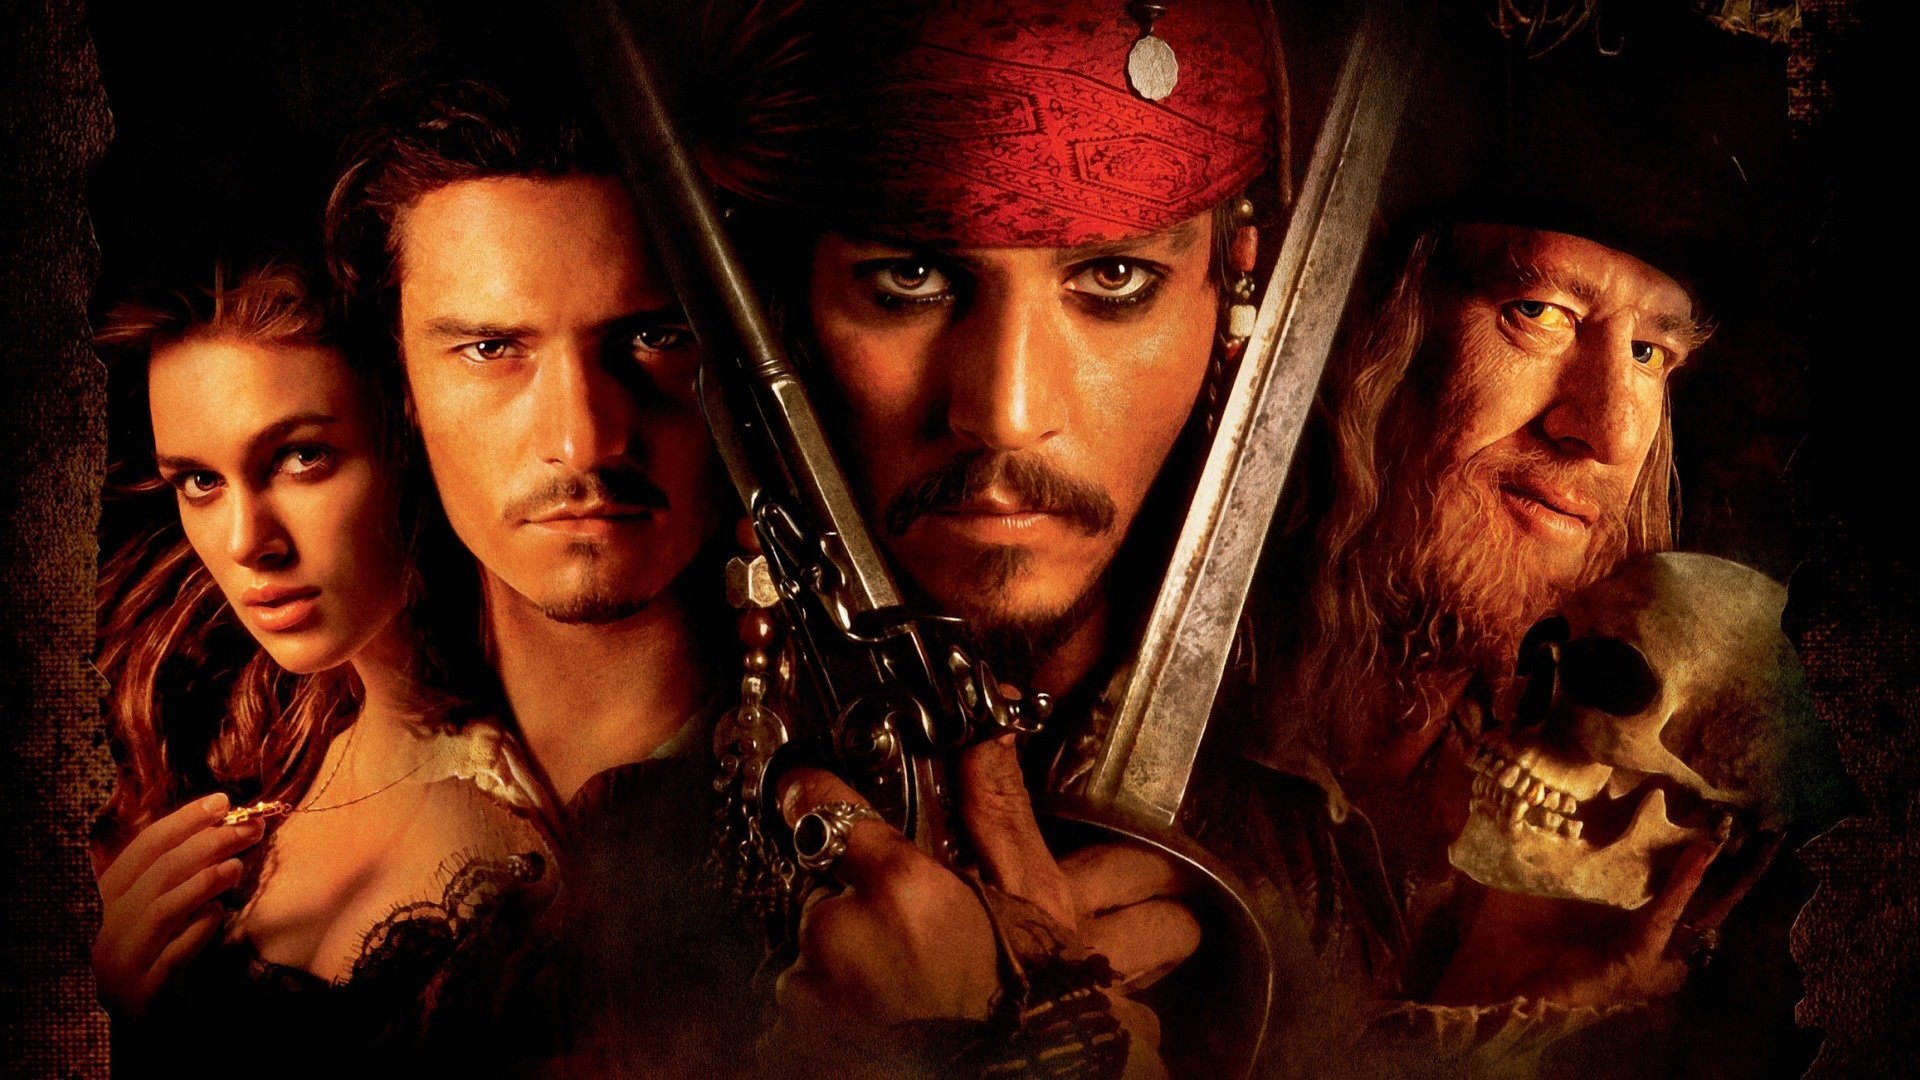 Download Pirates Of The Caribbean 1 HD Wallpapers – Free WordPress ...